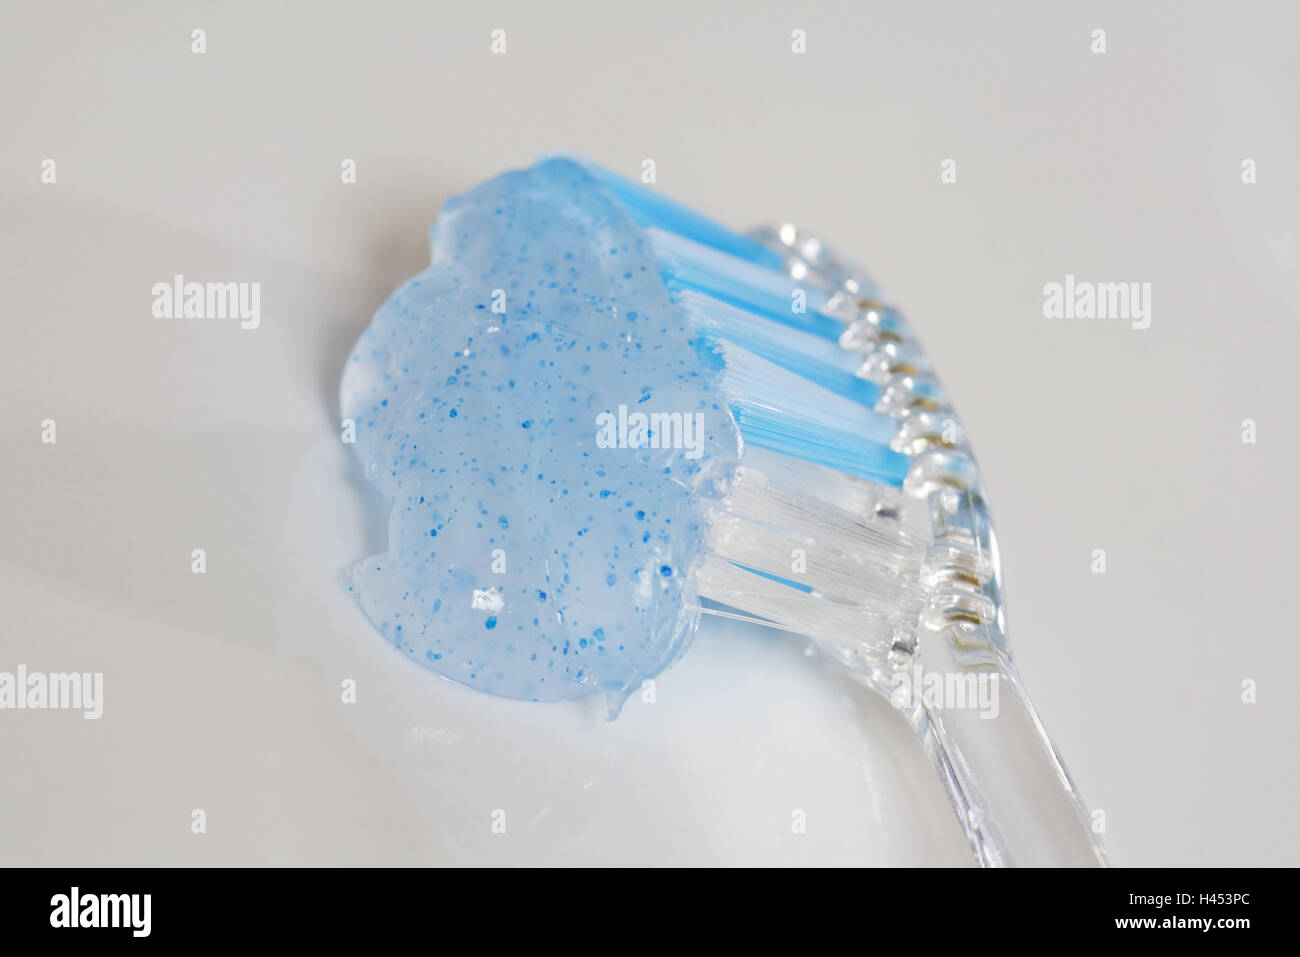 Toothbrush, brush head, cog gel, blue, transparent, close up, sink, hand toothbrush, paste, toothpaste, cog plaster gel, paste thread, gel, bristles, bichrome, transparent-blue, white-blue, prepares, care, personal care, make of a mess, oral hygiene, clean, clean, fallen down, tipped over, cog care, hygiene, body hygiene, oral hygiene, cog hygiene, cosmetics articles, cosmetics, hygiene article, cleanliness, cleanness, cog cleaning, nobody, colour mood, colour, detail, inside, Stock Photo